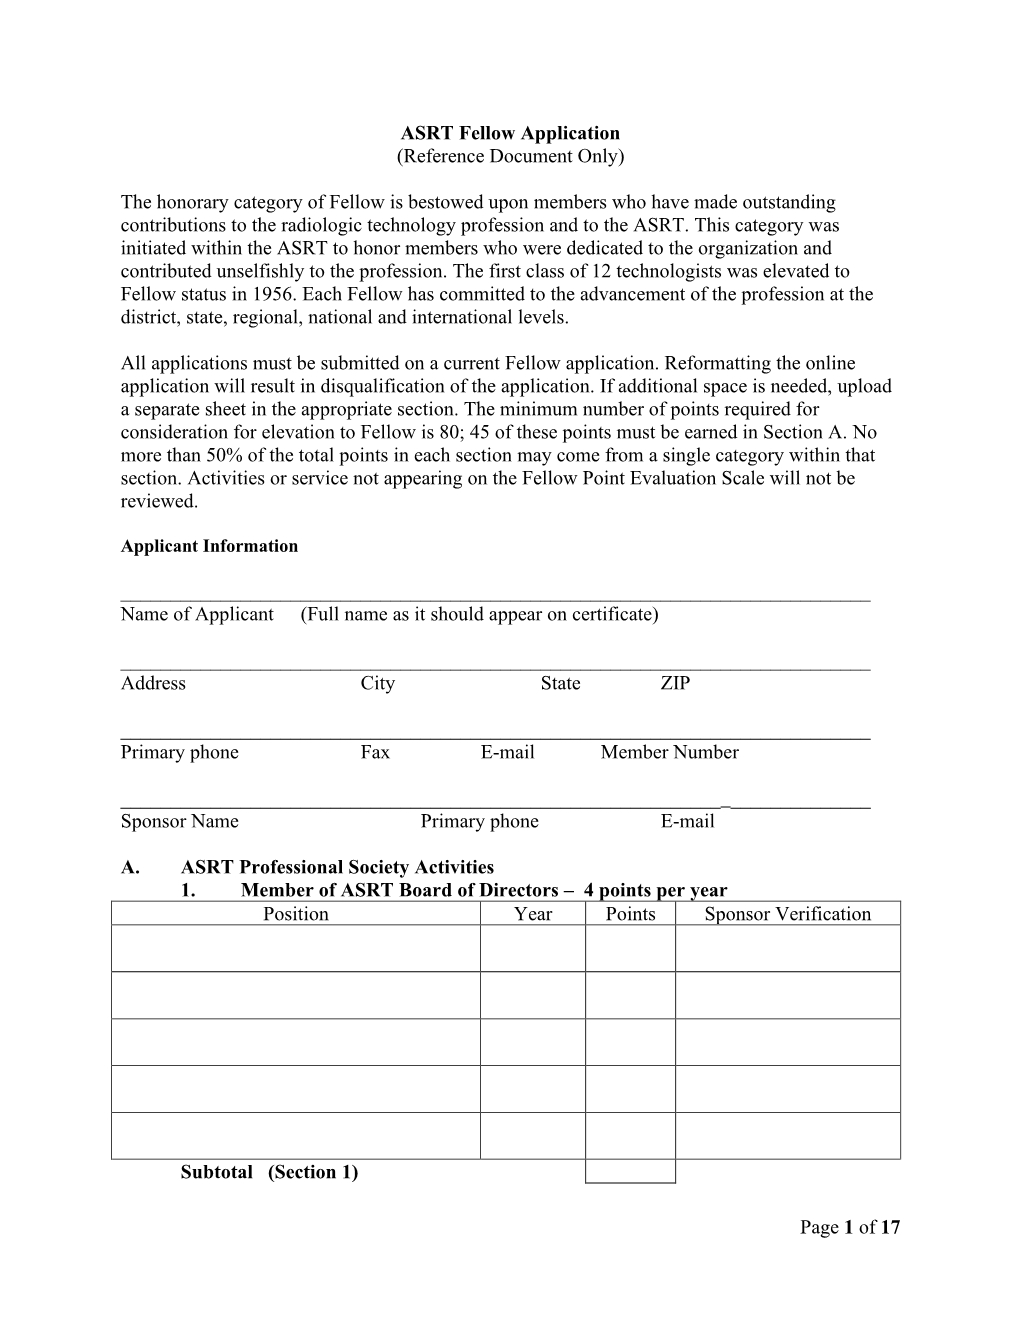 ASRT Fellow Application (Reference Document Only)